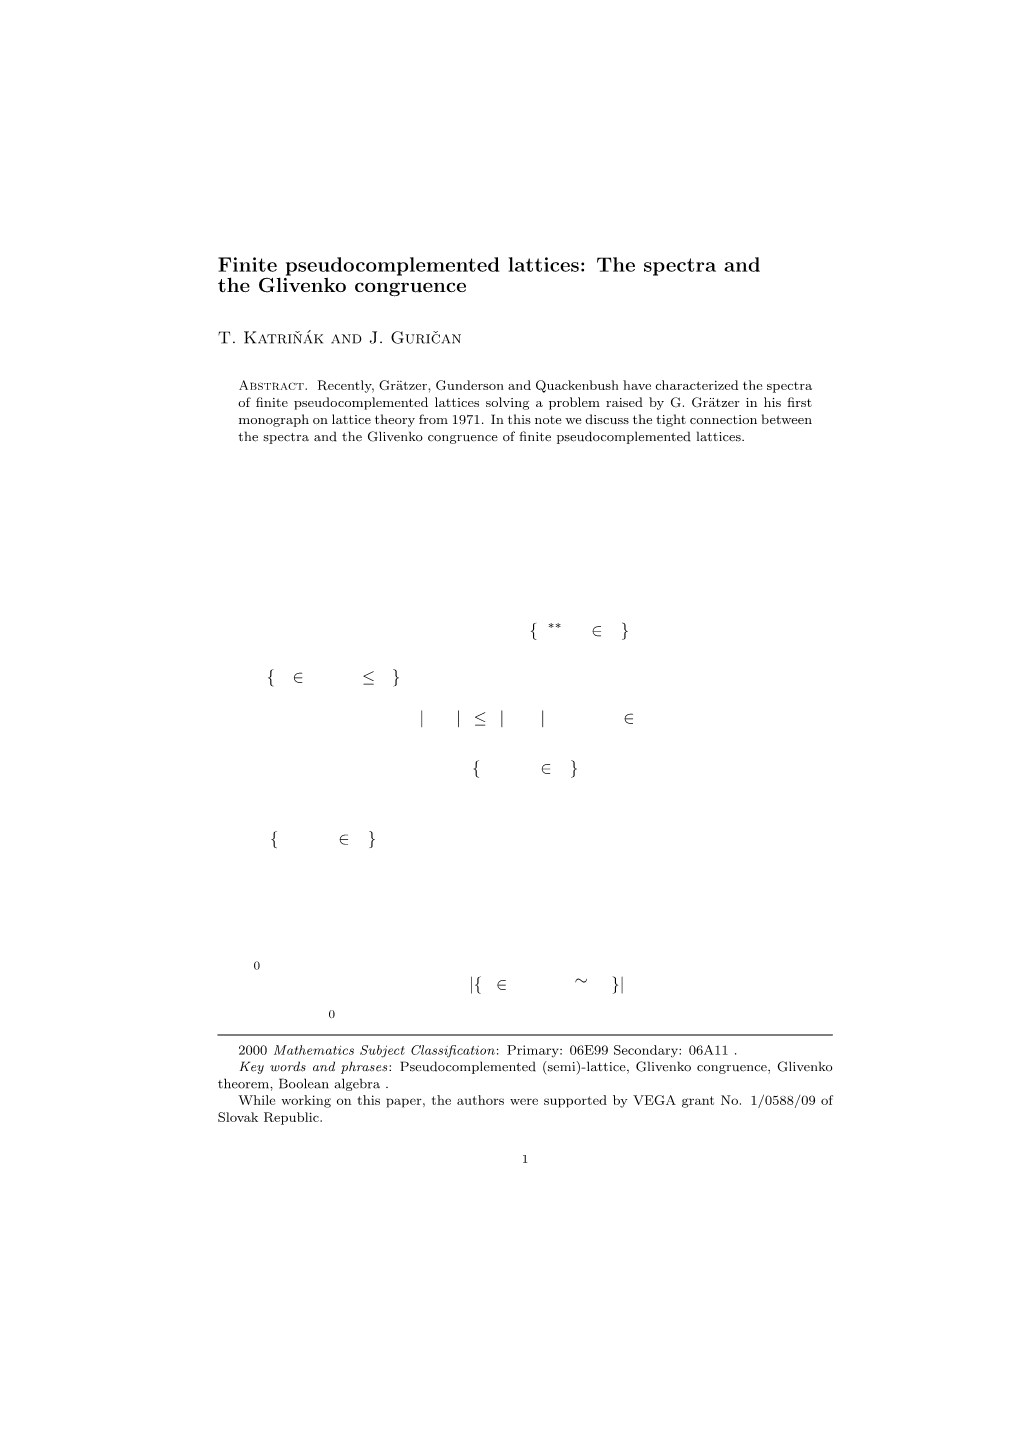 Finite Pseudocomplemented Lattices: the Spectra and the Glivenko Congruence